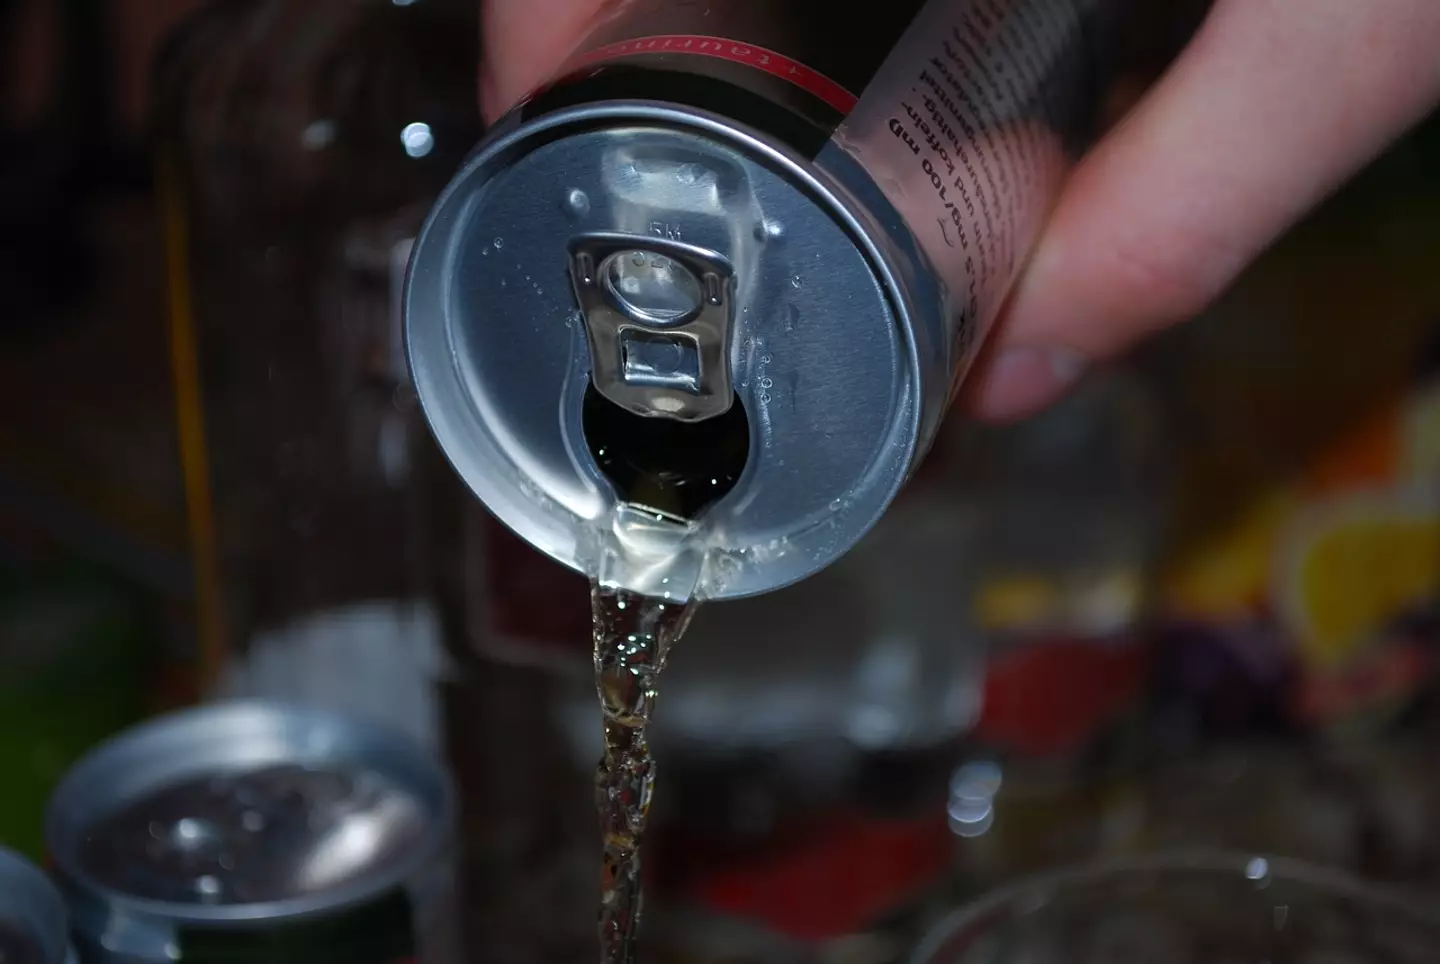 Scientists say that taurine - which is found in energy drinks - could hold an 'elixir of life'.